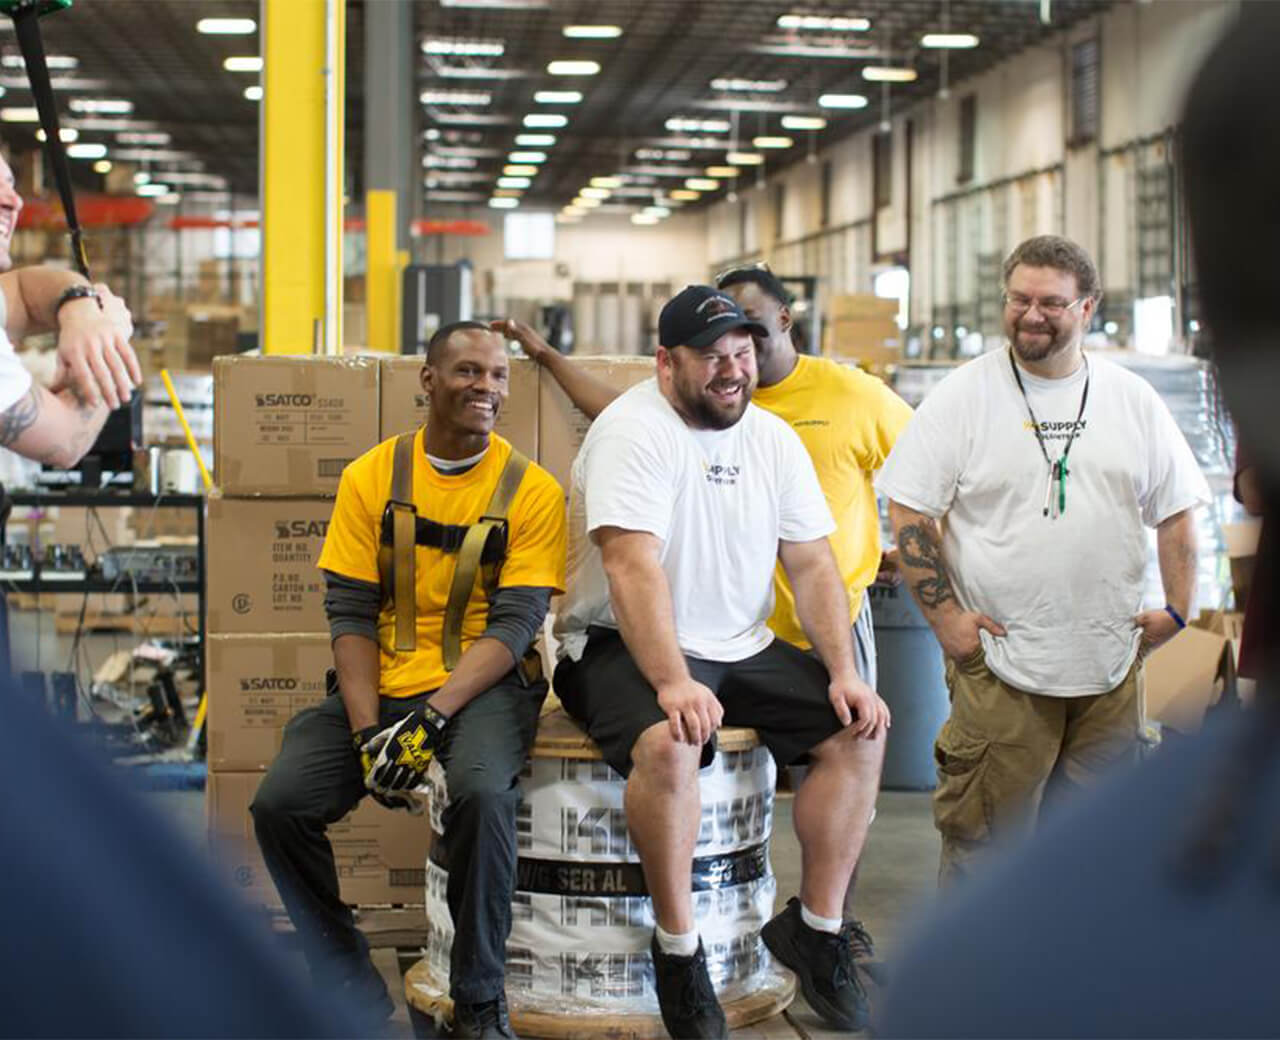 A group of HD Supply personnel laughing and smiling in a warehouse setting